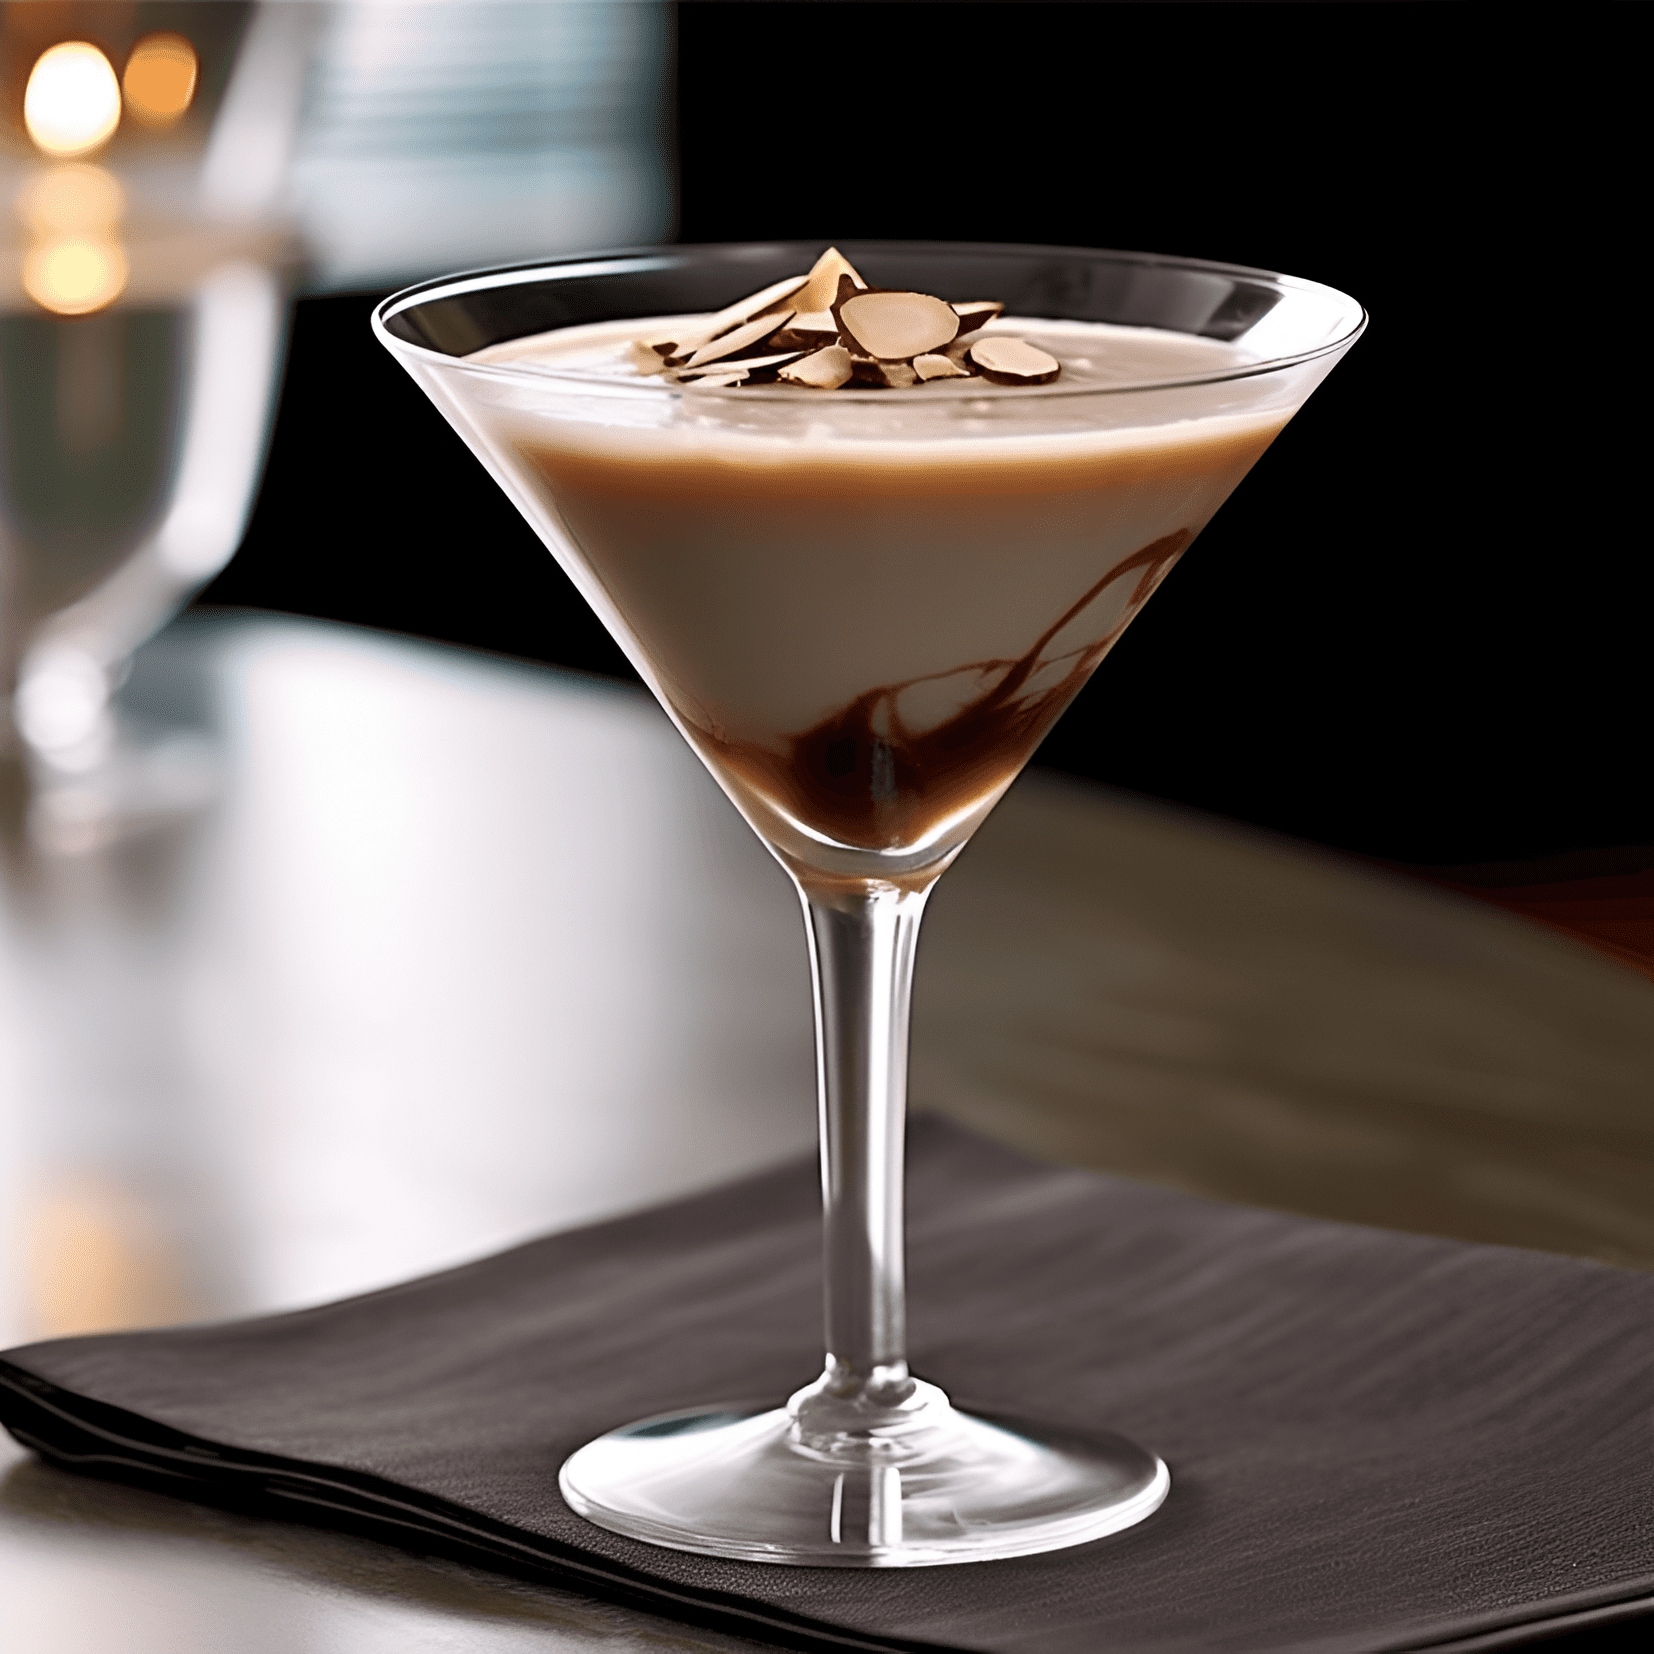 The Almond Joy cocktail is a sweet, creamy, and indulgent drink with a rich chocolate flavor, nutty almond undertones, and a hint of tropical coconut. It is a smooth and velvety cocktail with a well-balanced sweetness.